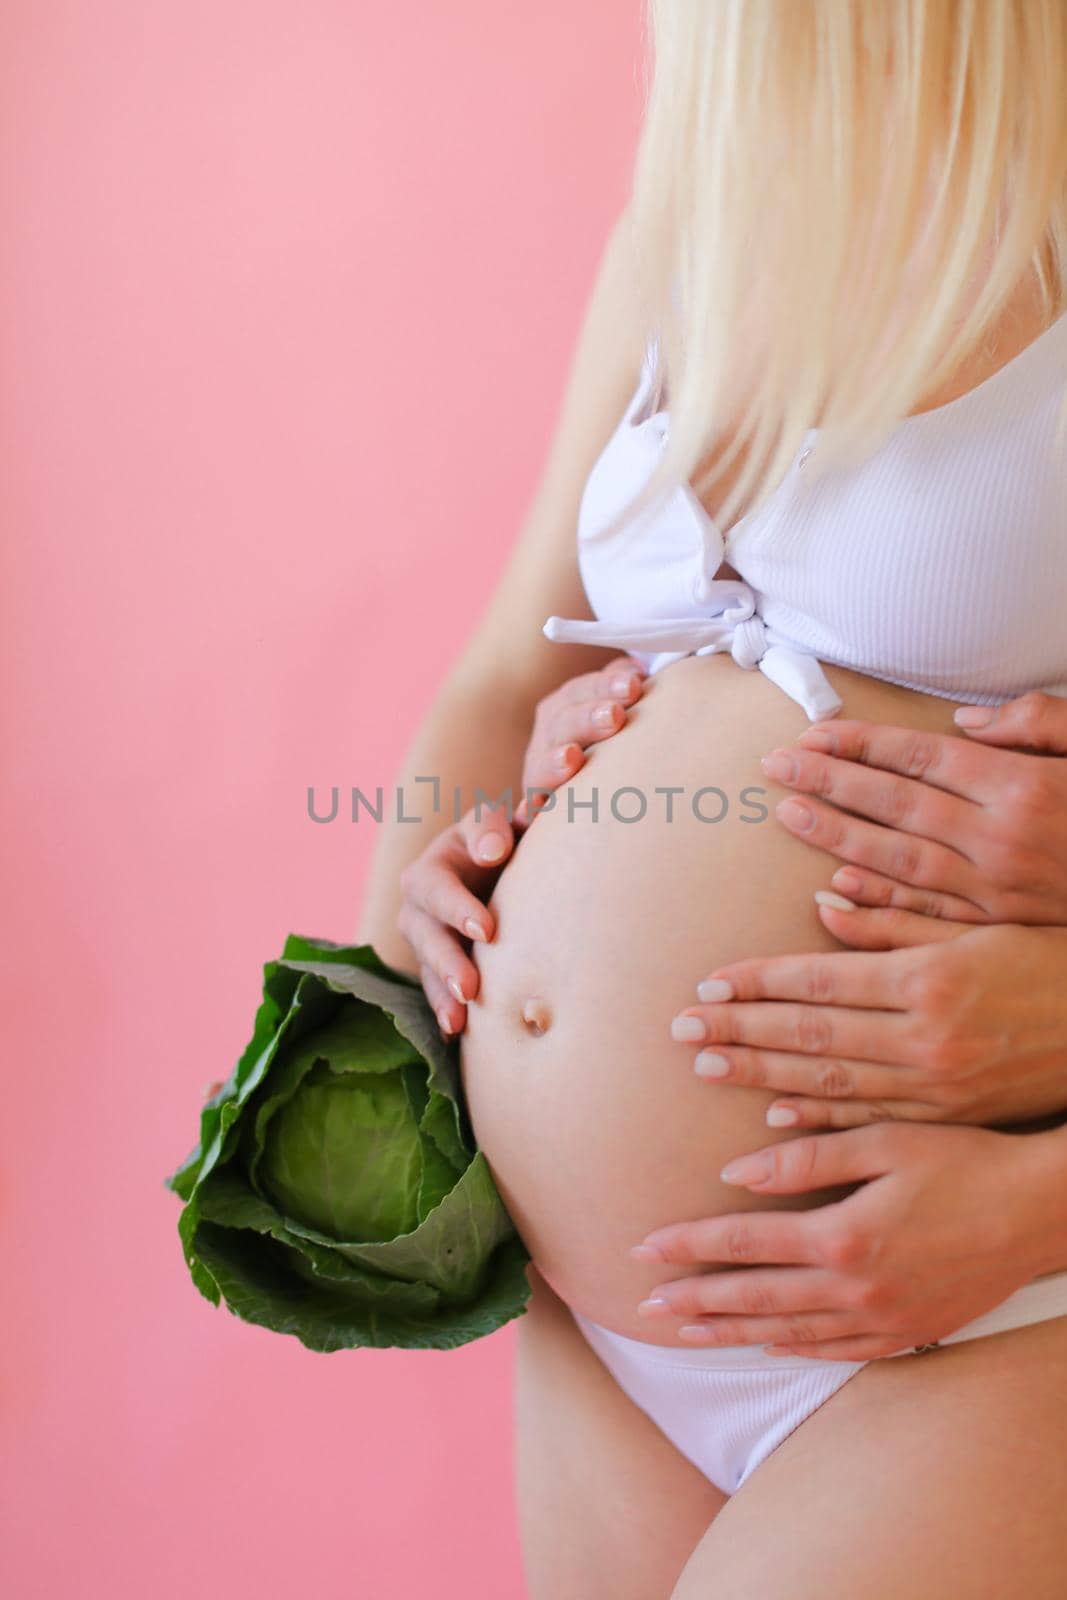 Blonde pregnant woman in underwear holding belly and keeping cabbage in pink monophonic background. Concept of expactant photo session.